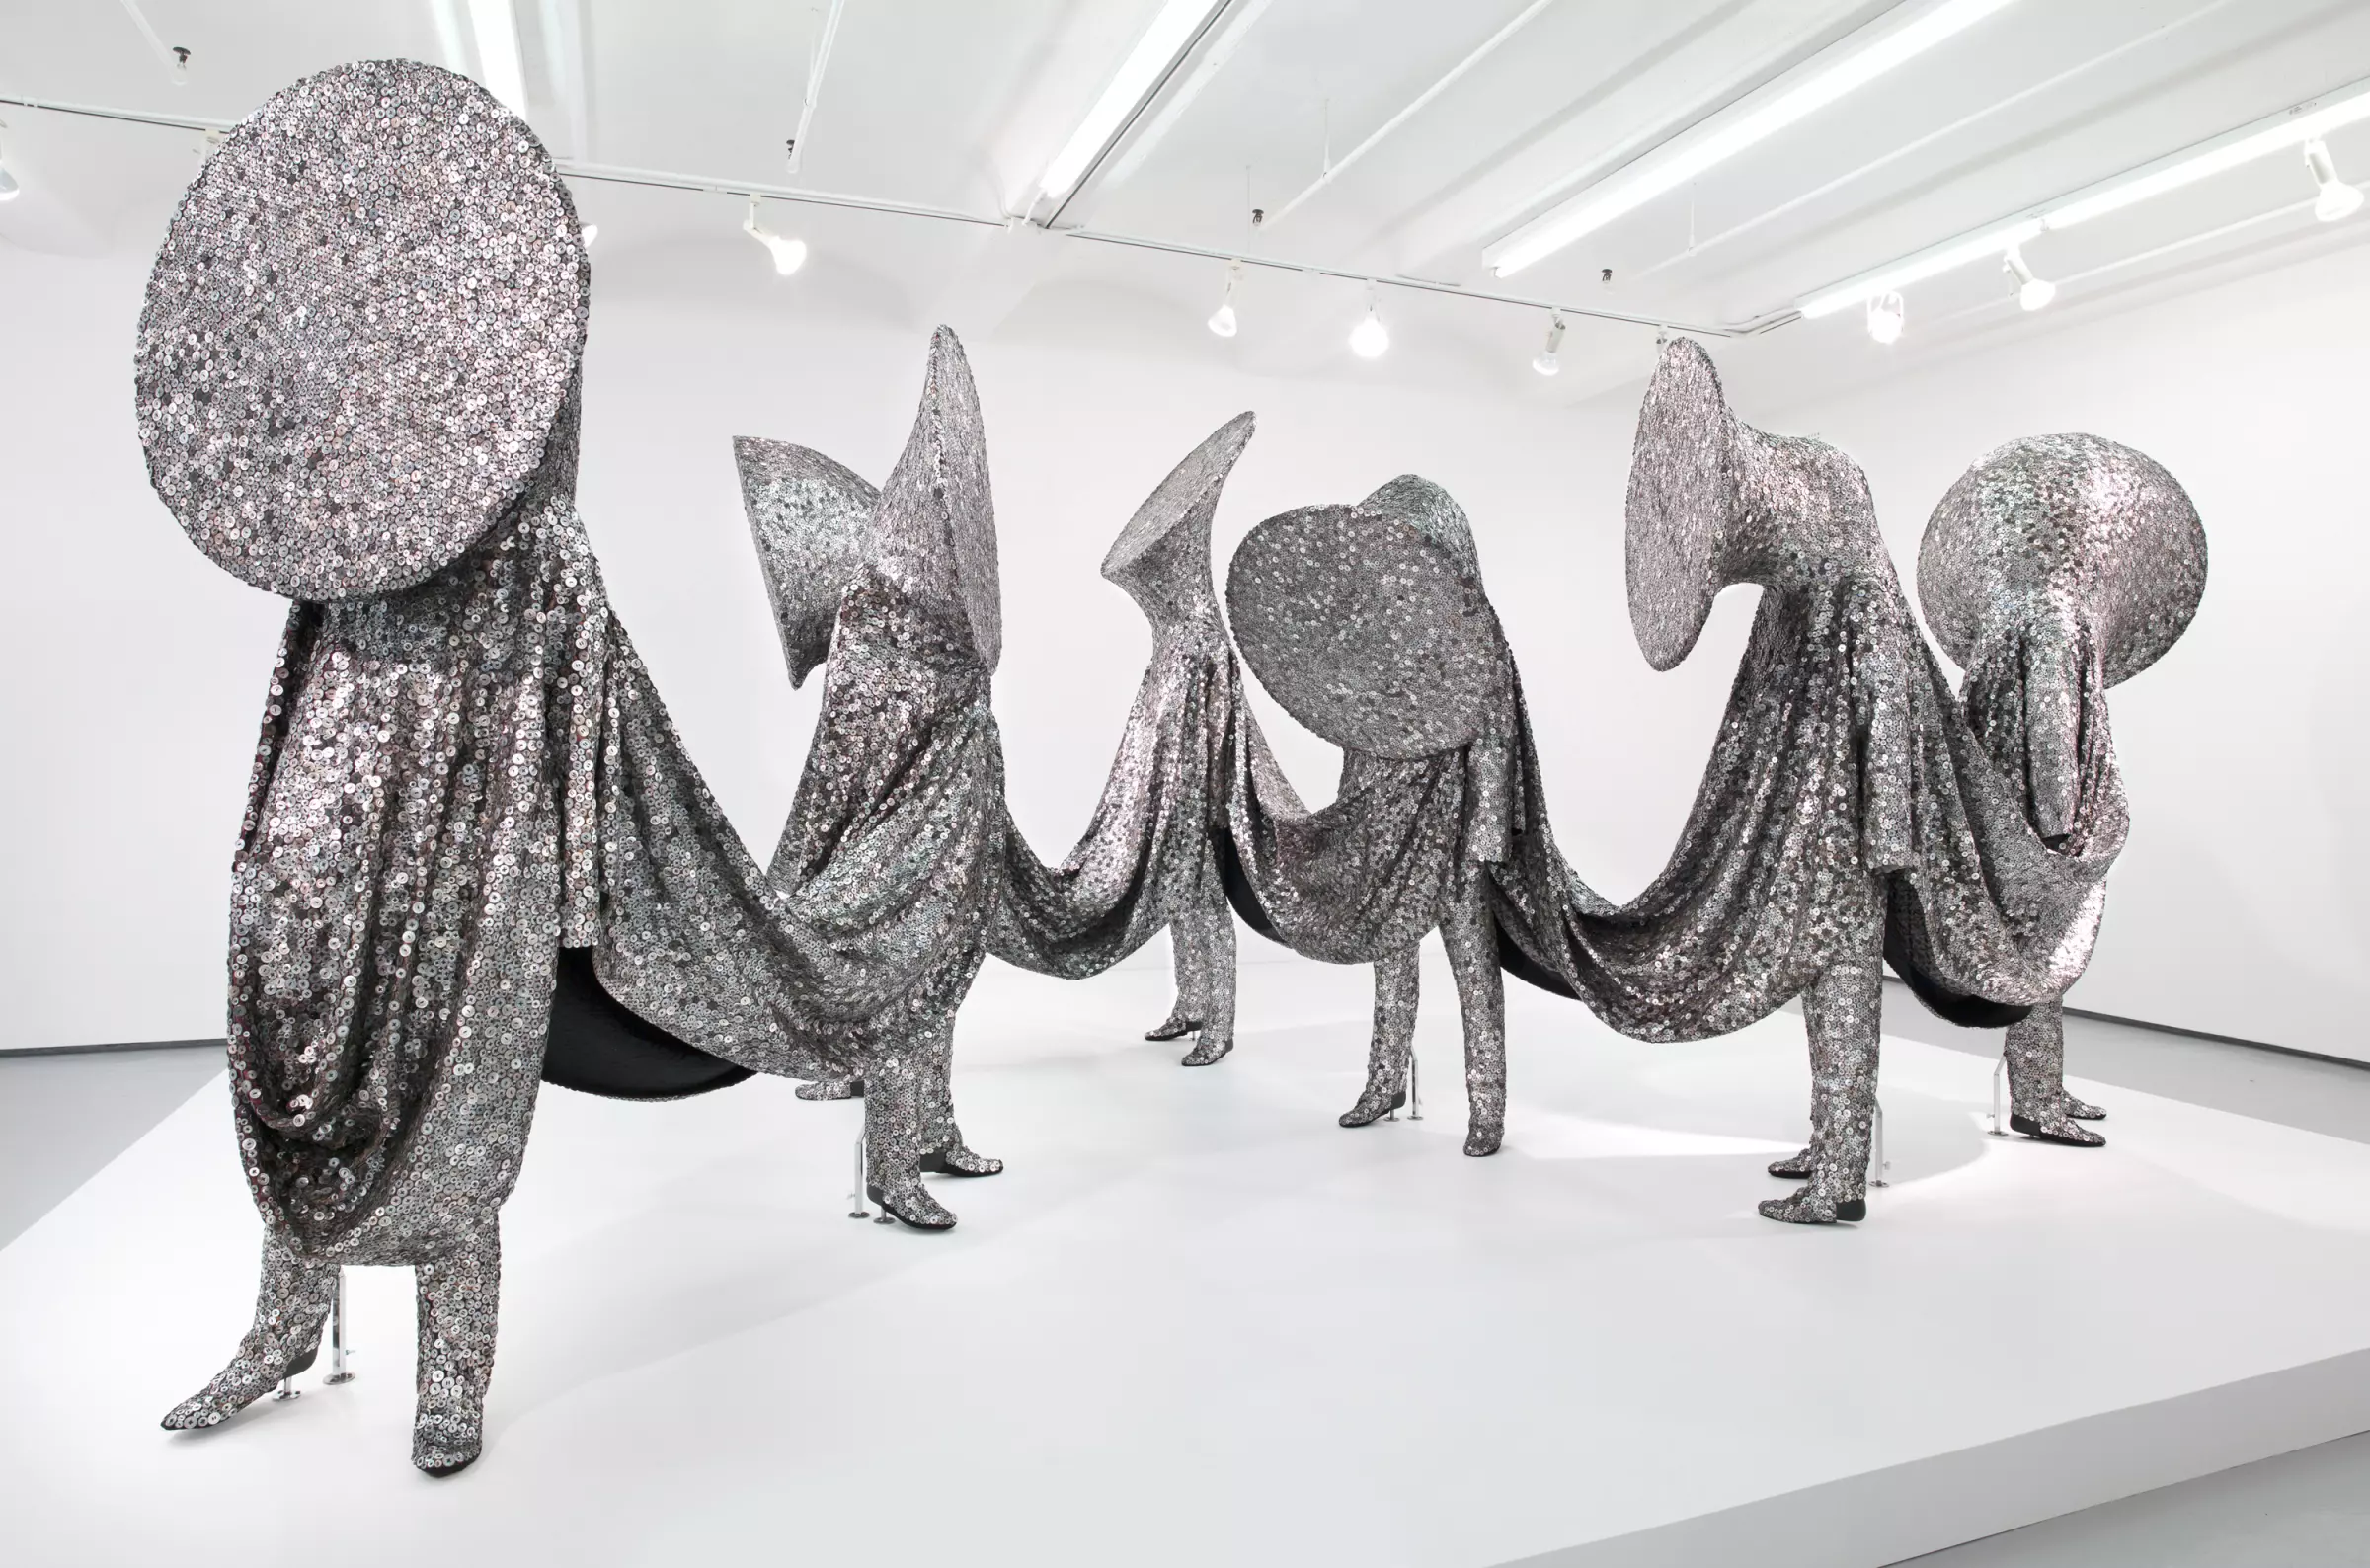 several figures with tuba-like heads and covered from head to toe in a metallic fabric stand on a white platform